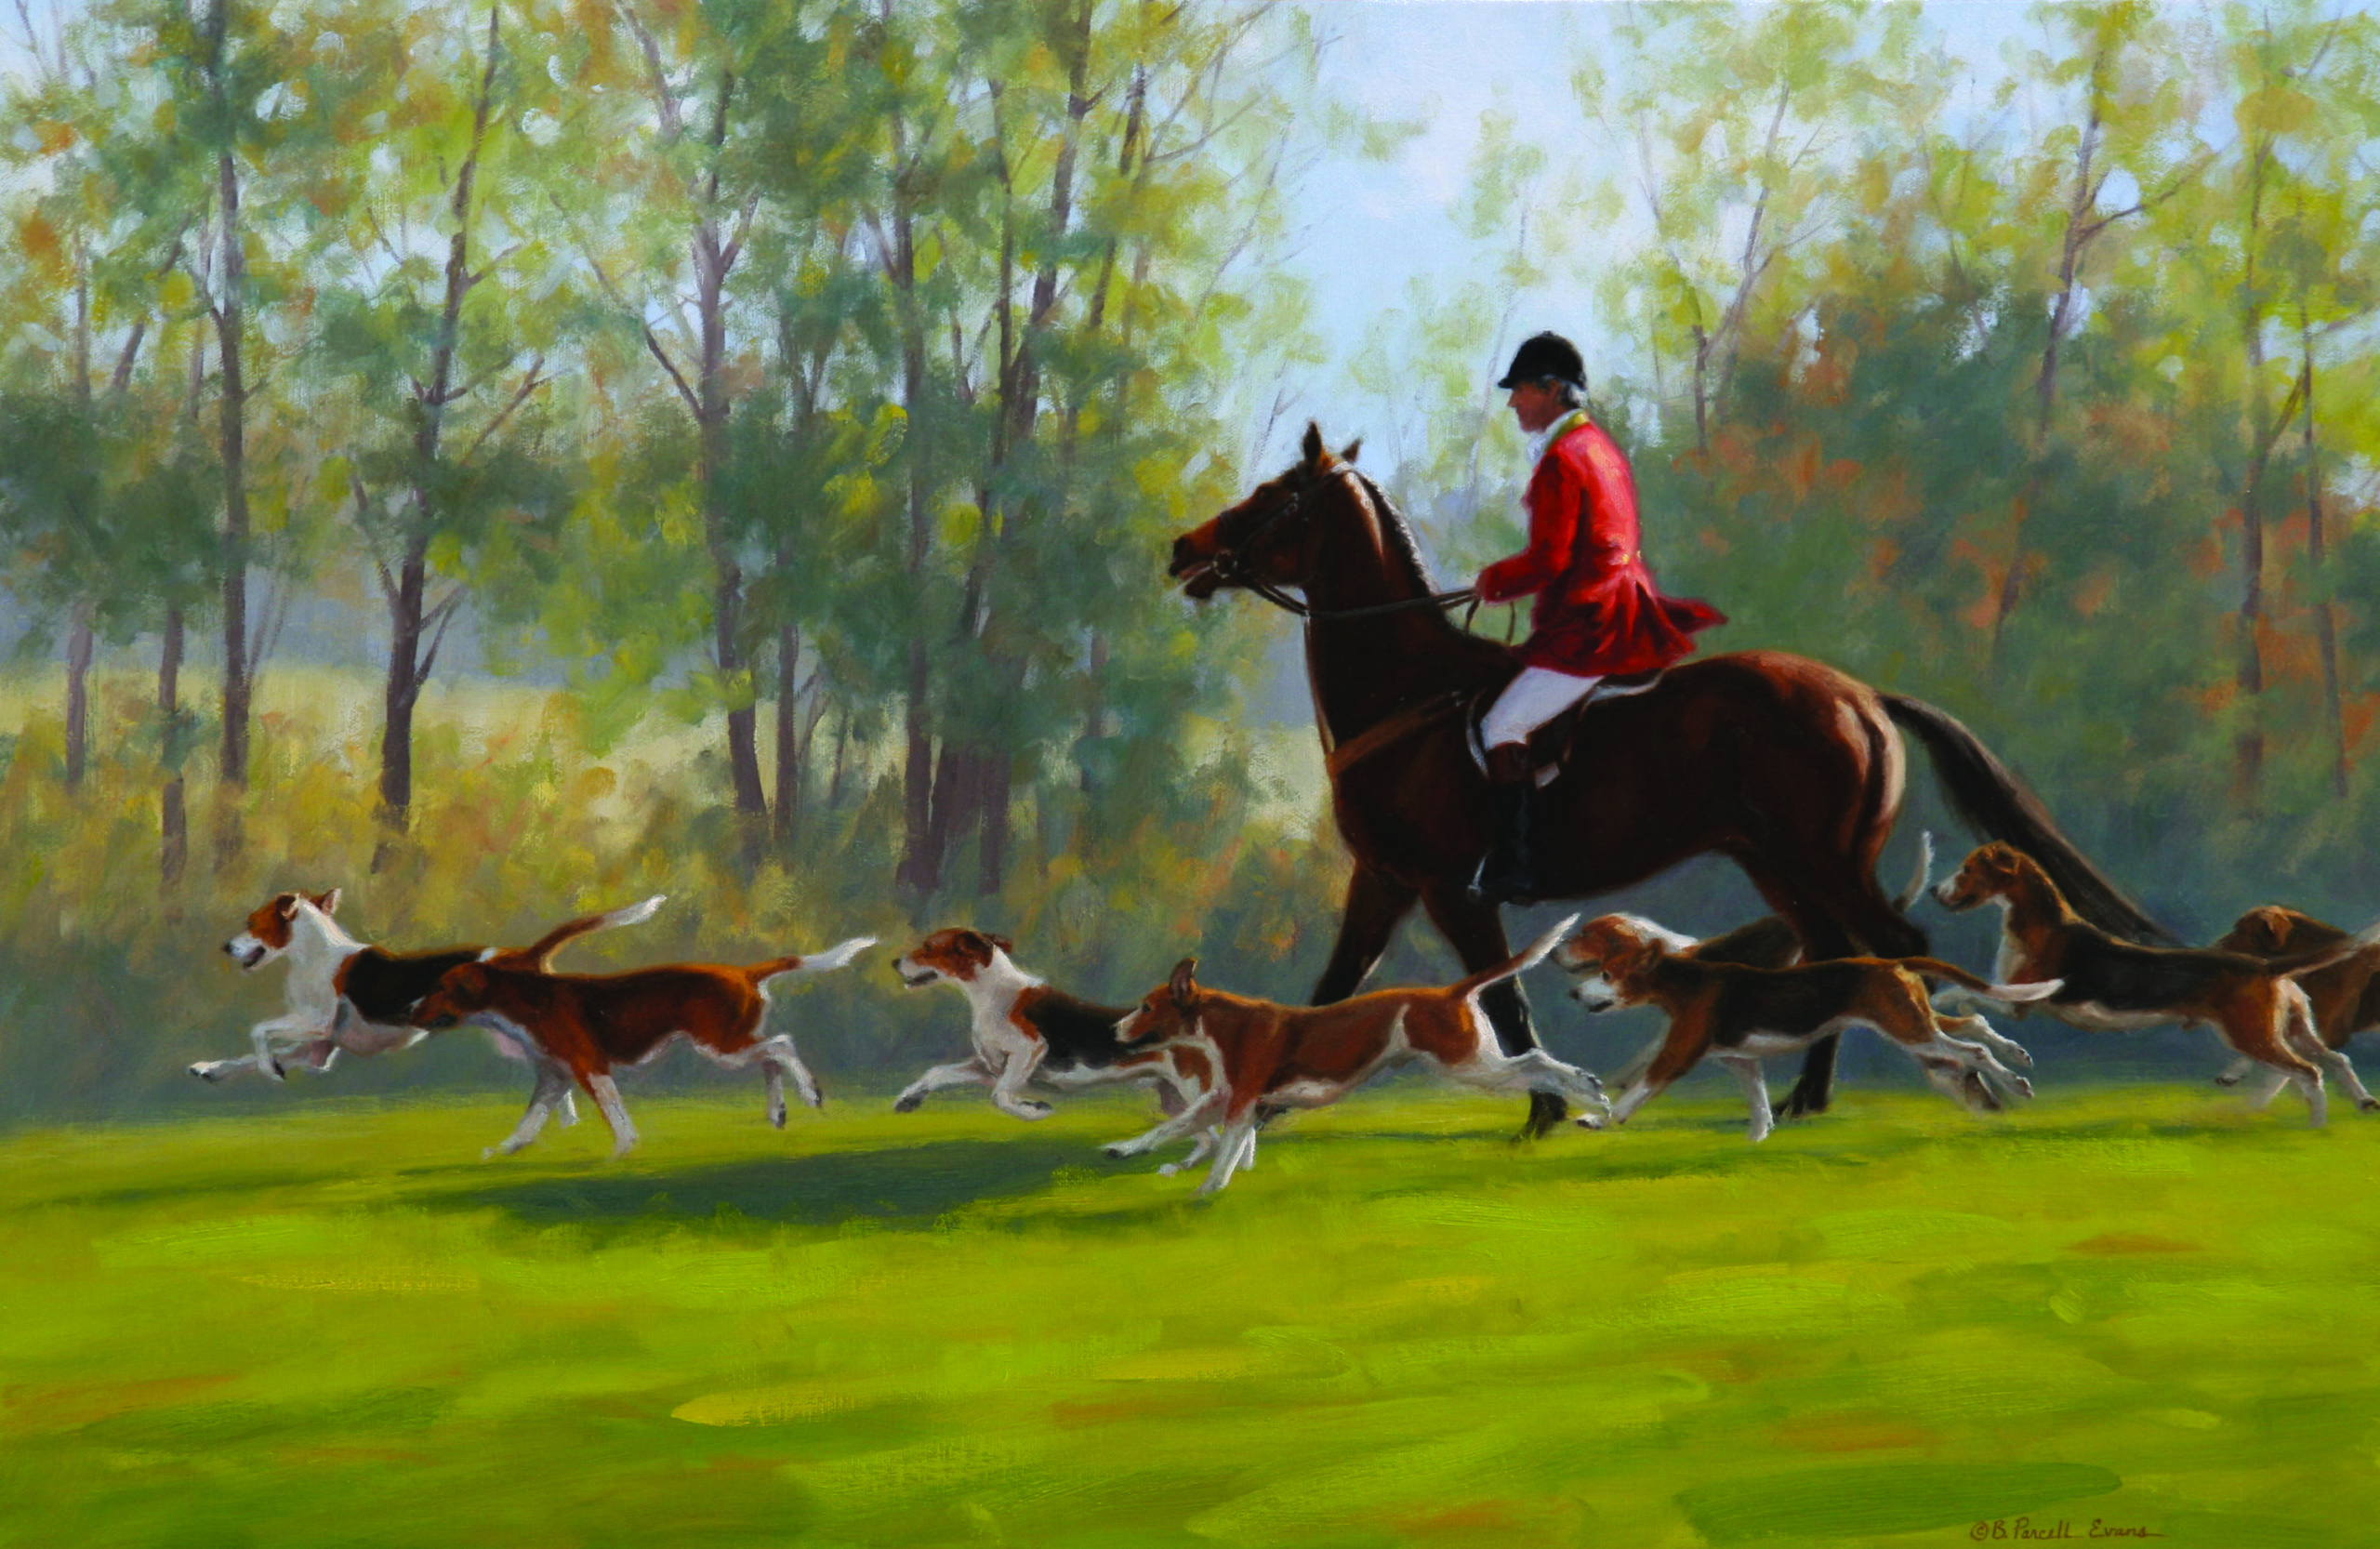 Paintings of horses - Beth Parcell (b. 1958), "Spirited Departure," 2010, oil on canvas, 20 x 30 in., private collection